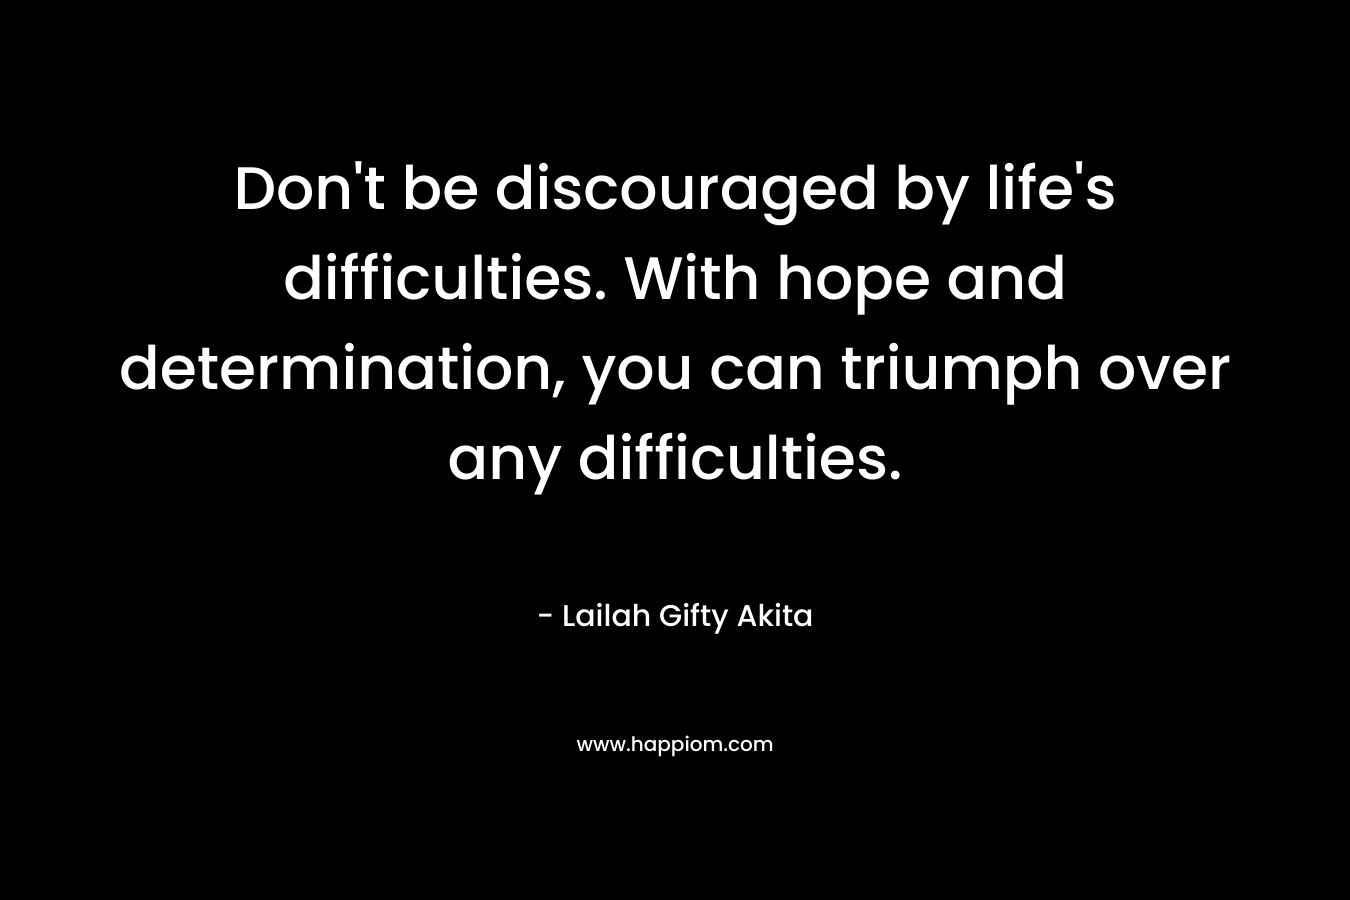 Don't be discouraged by life's difficulties. With hope and determination, you can triumph over any difficulties.